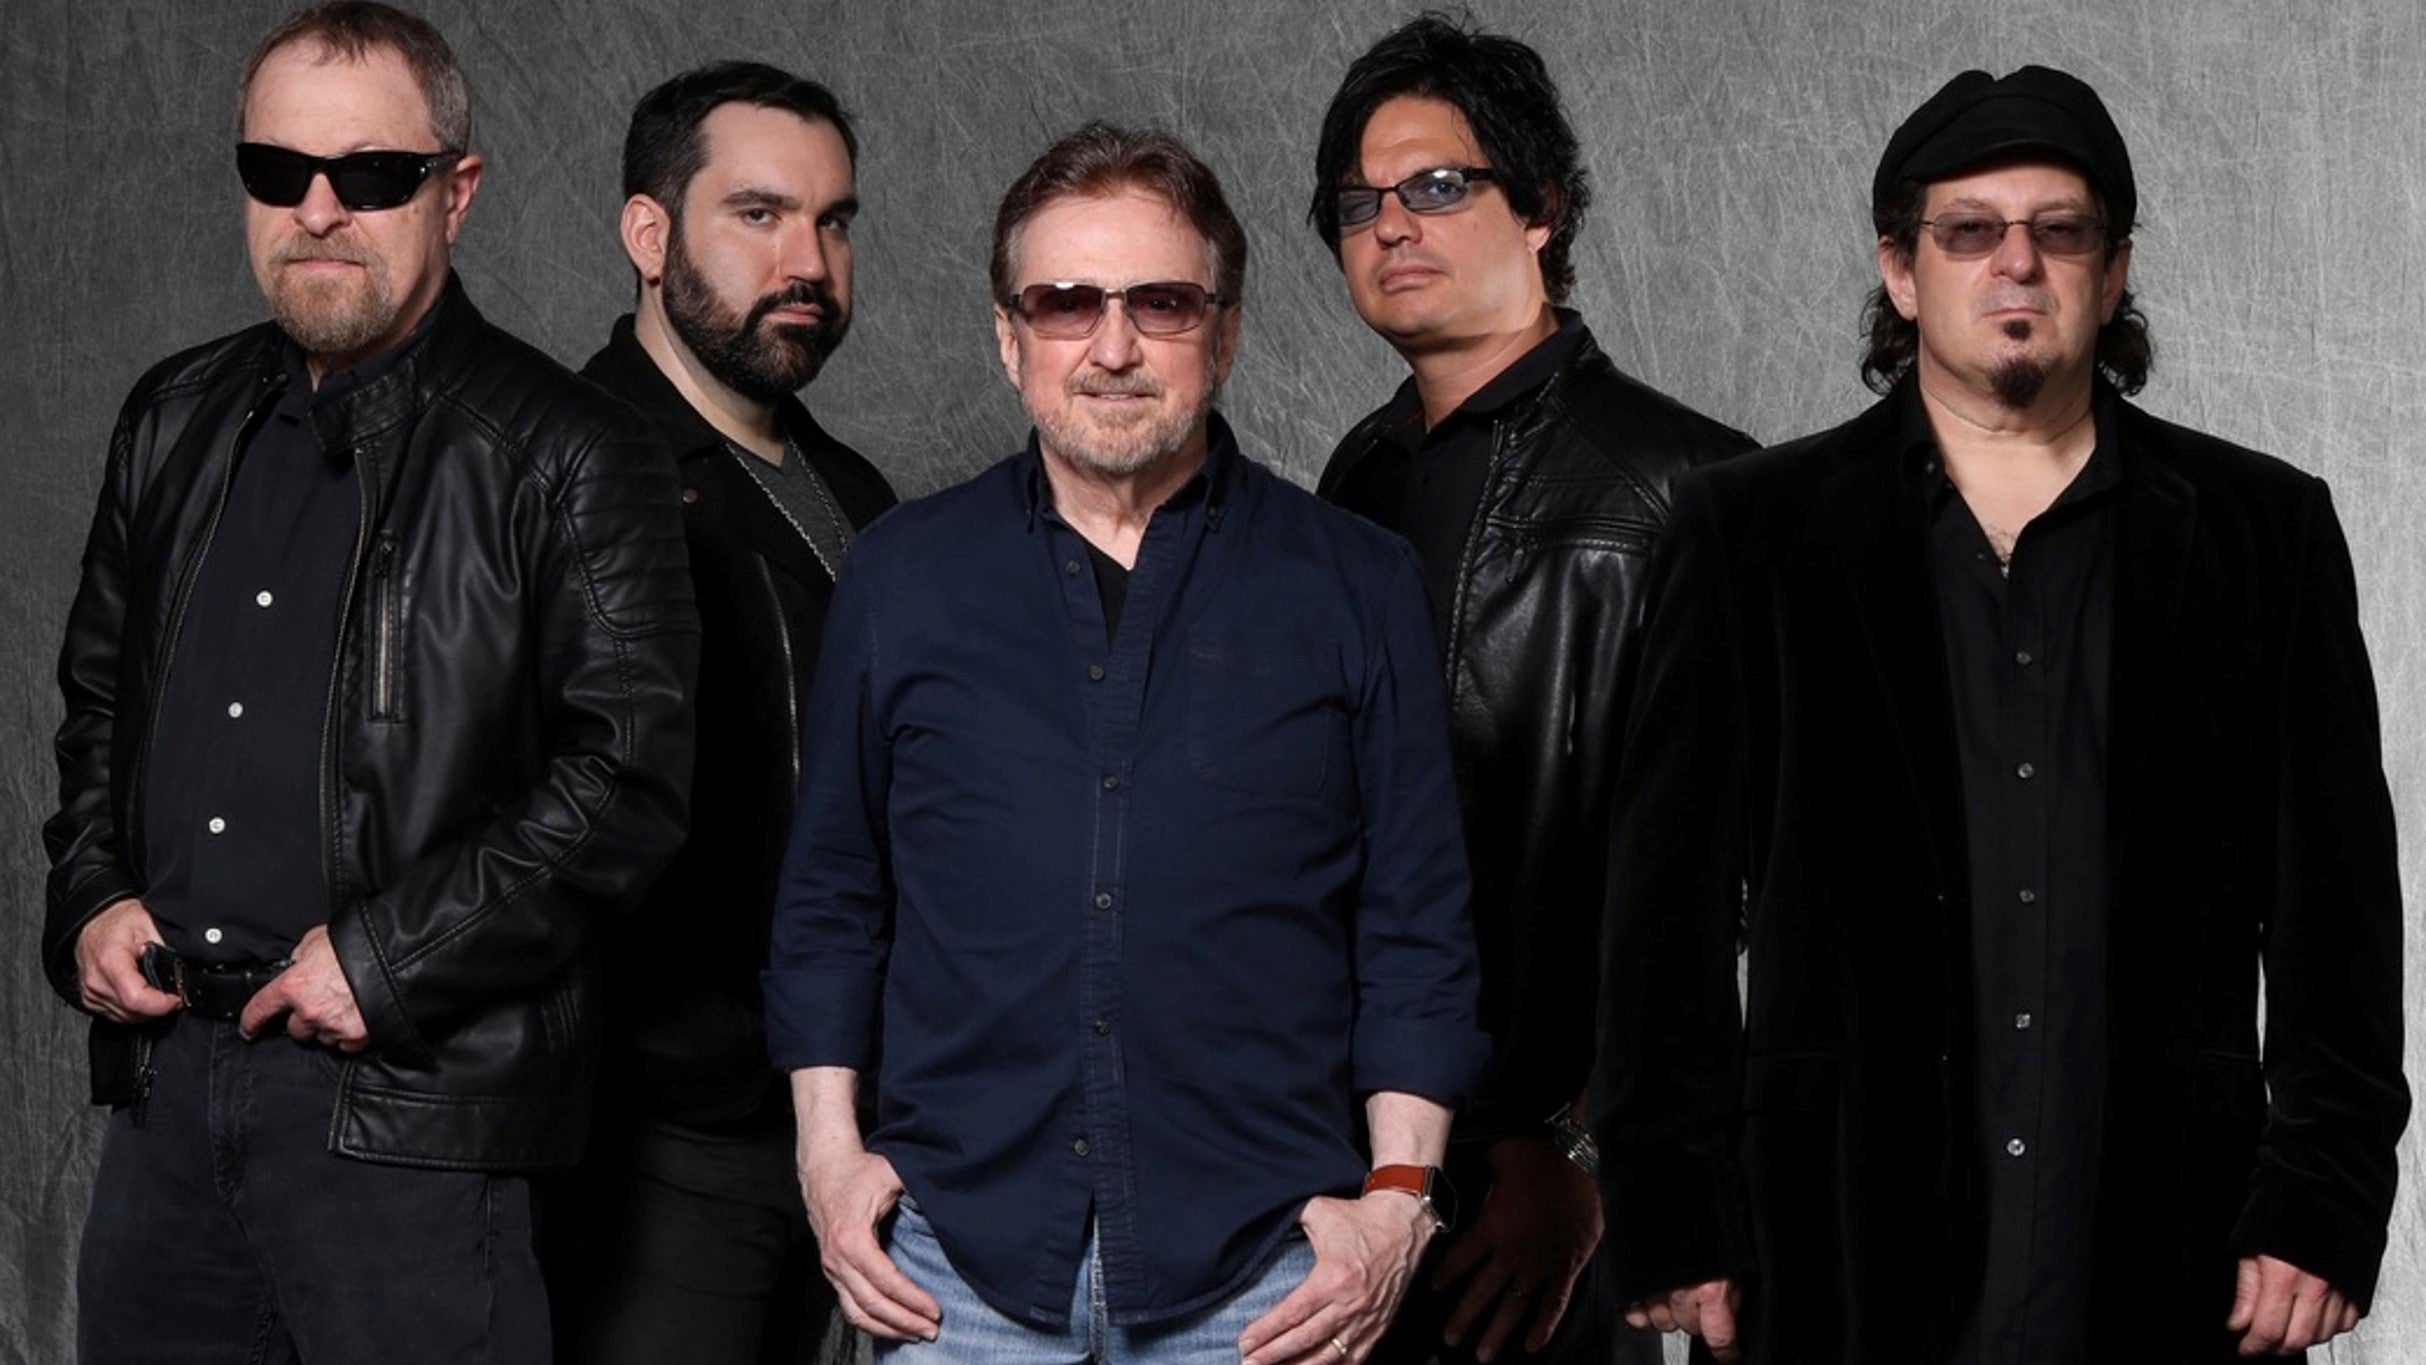 Blue Oyster Cult with Tommy DeCarlo and Jason Scheff